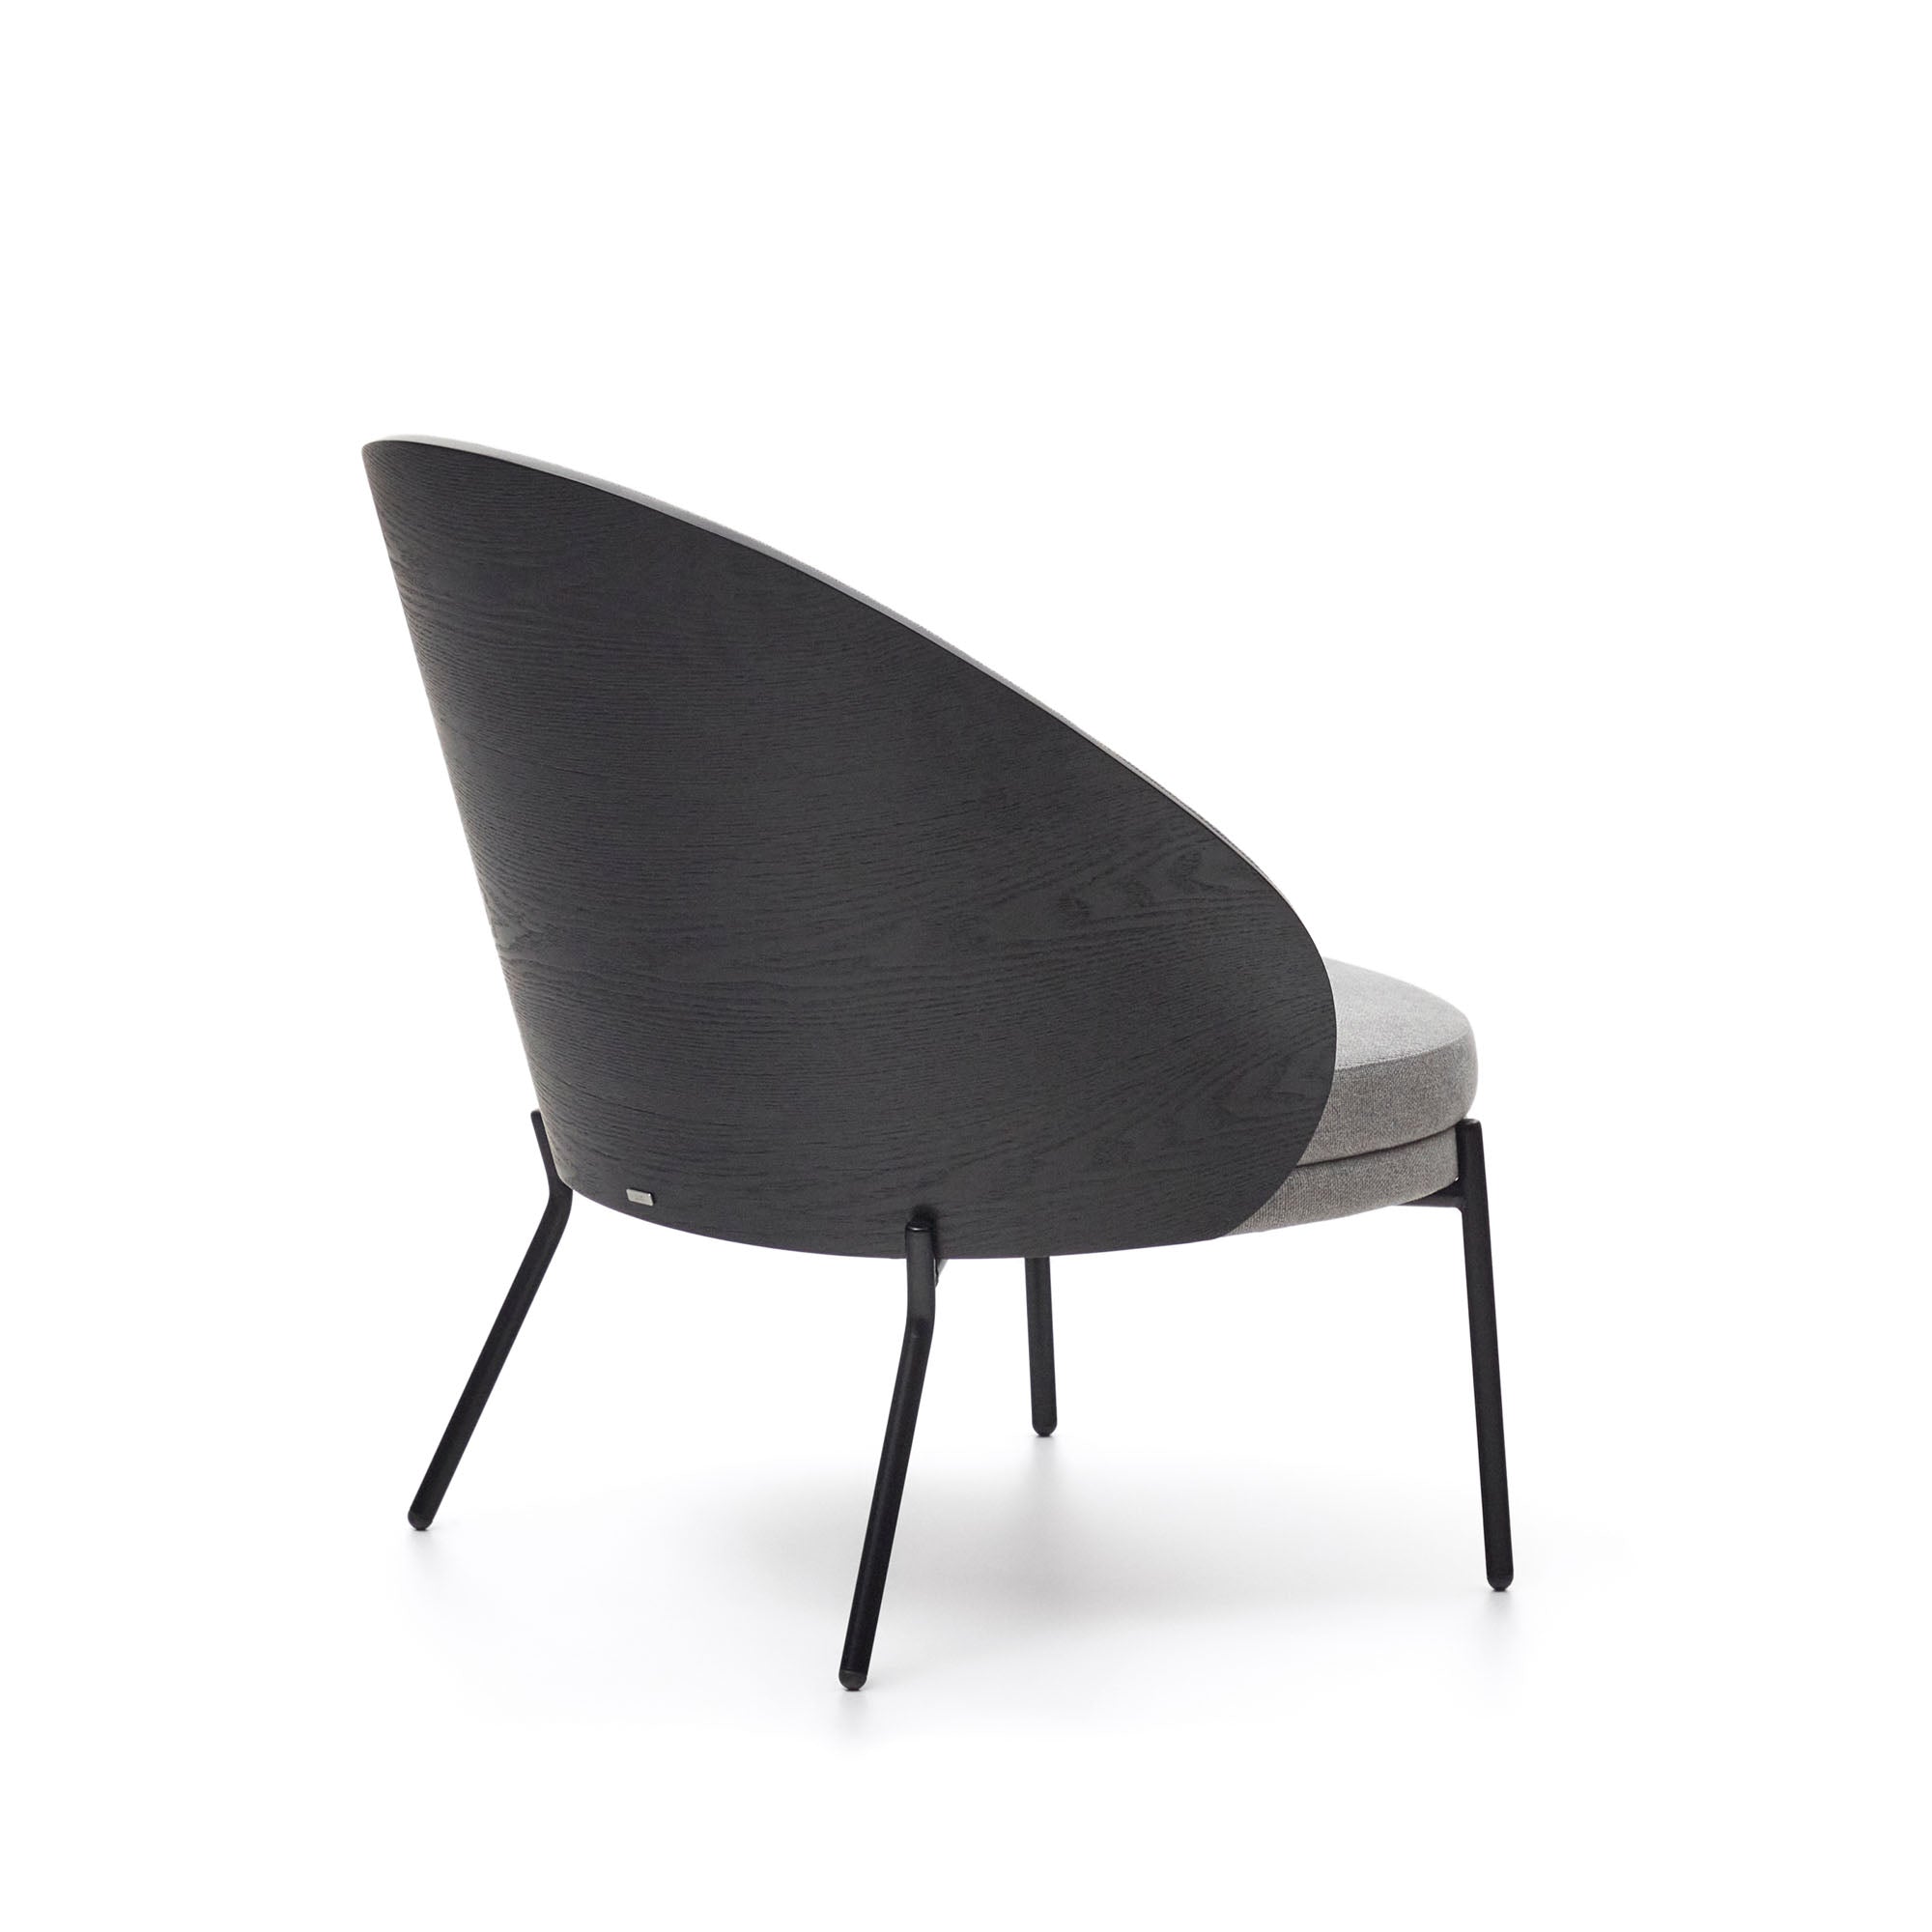 Eamy light grey armchair in an ash wood veneer with a black finish and black metal